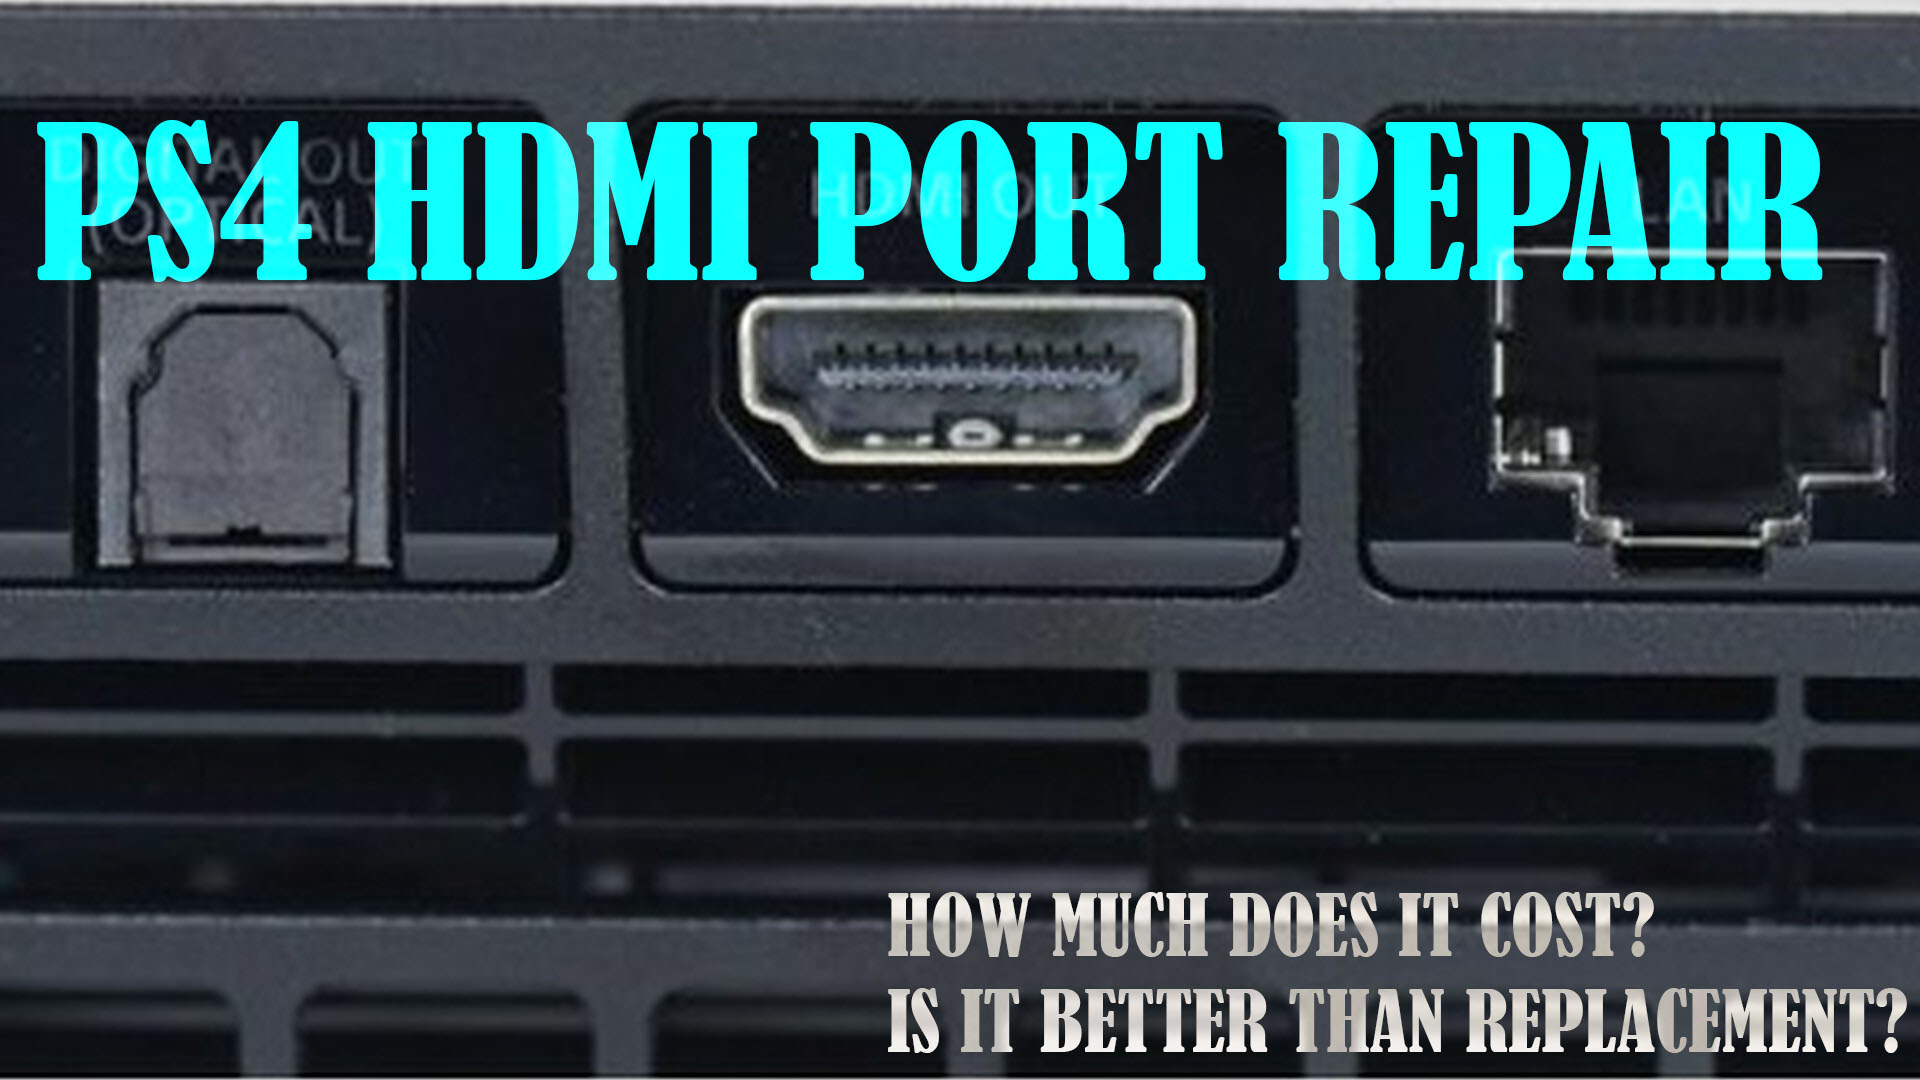 PS4 HDMI Port Repair  How much does it cost?